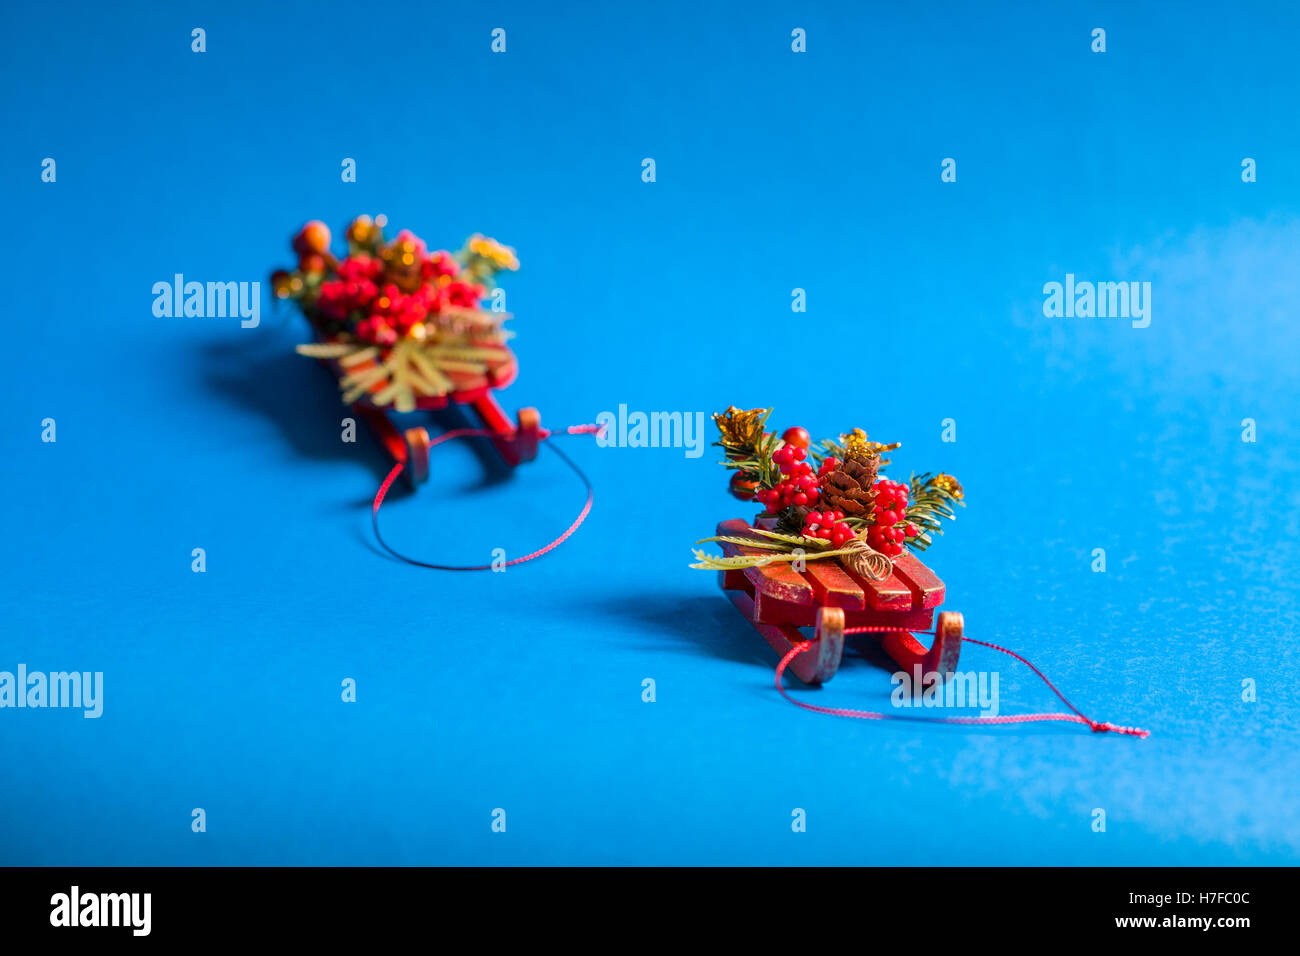 Christmas card in horizontal orientation with decorative sleds standing on blue background. Stock Photo